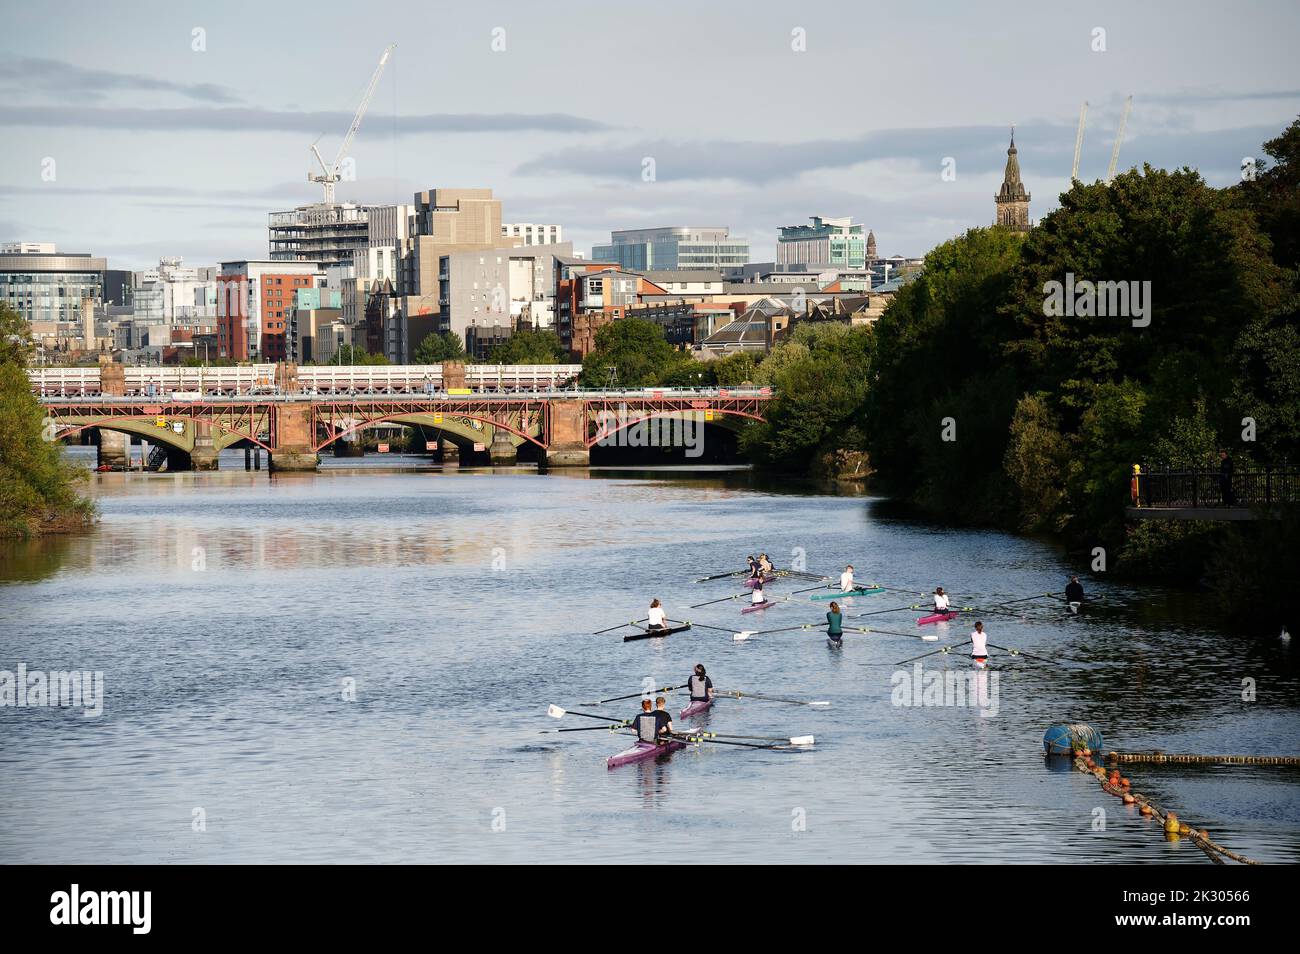 Members from the Boating club at Glasgow Green in canoes Stock Photo